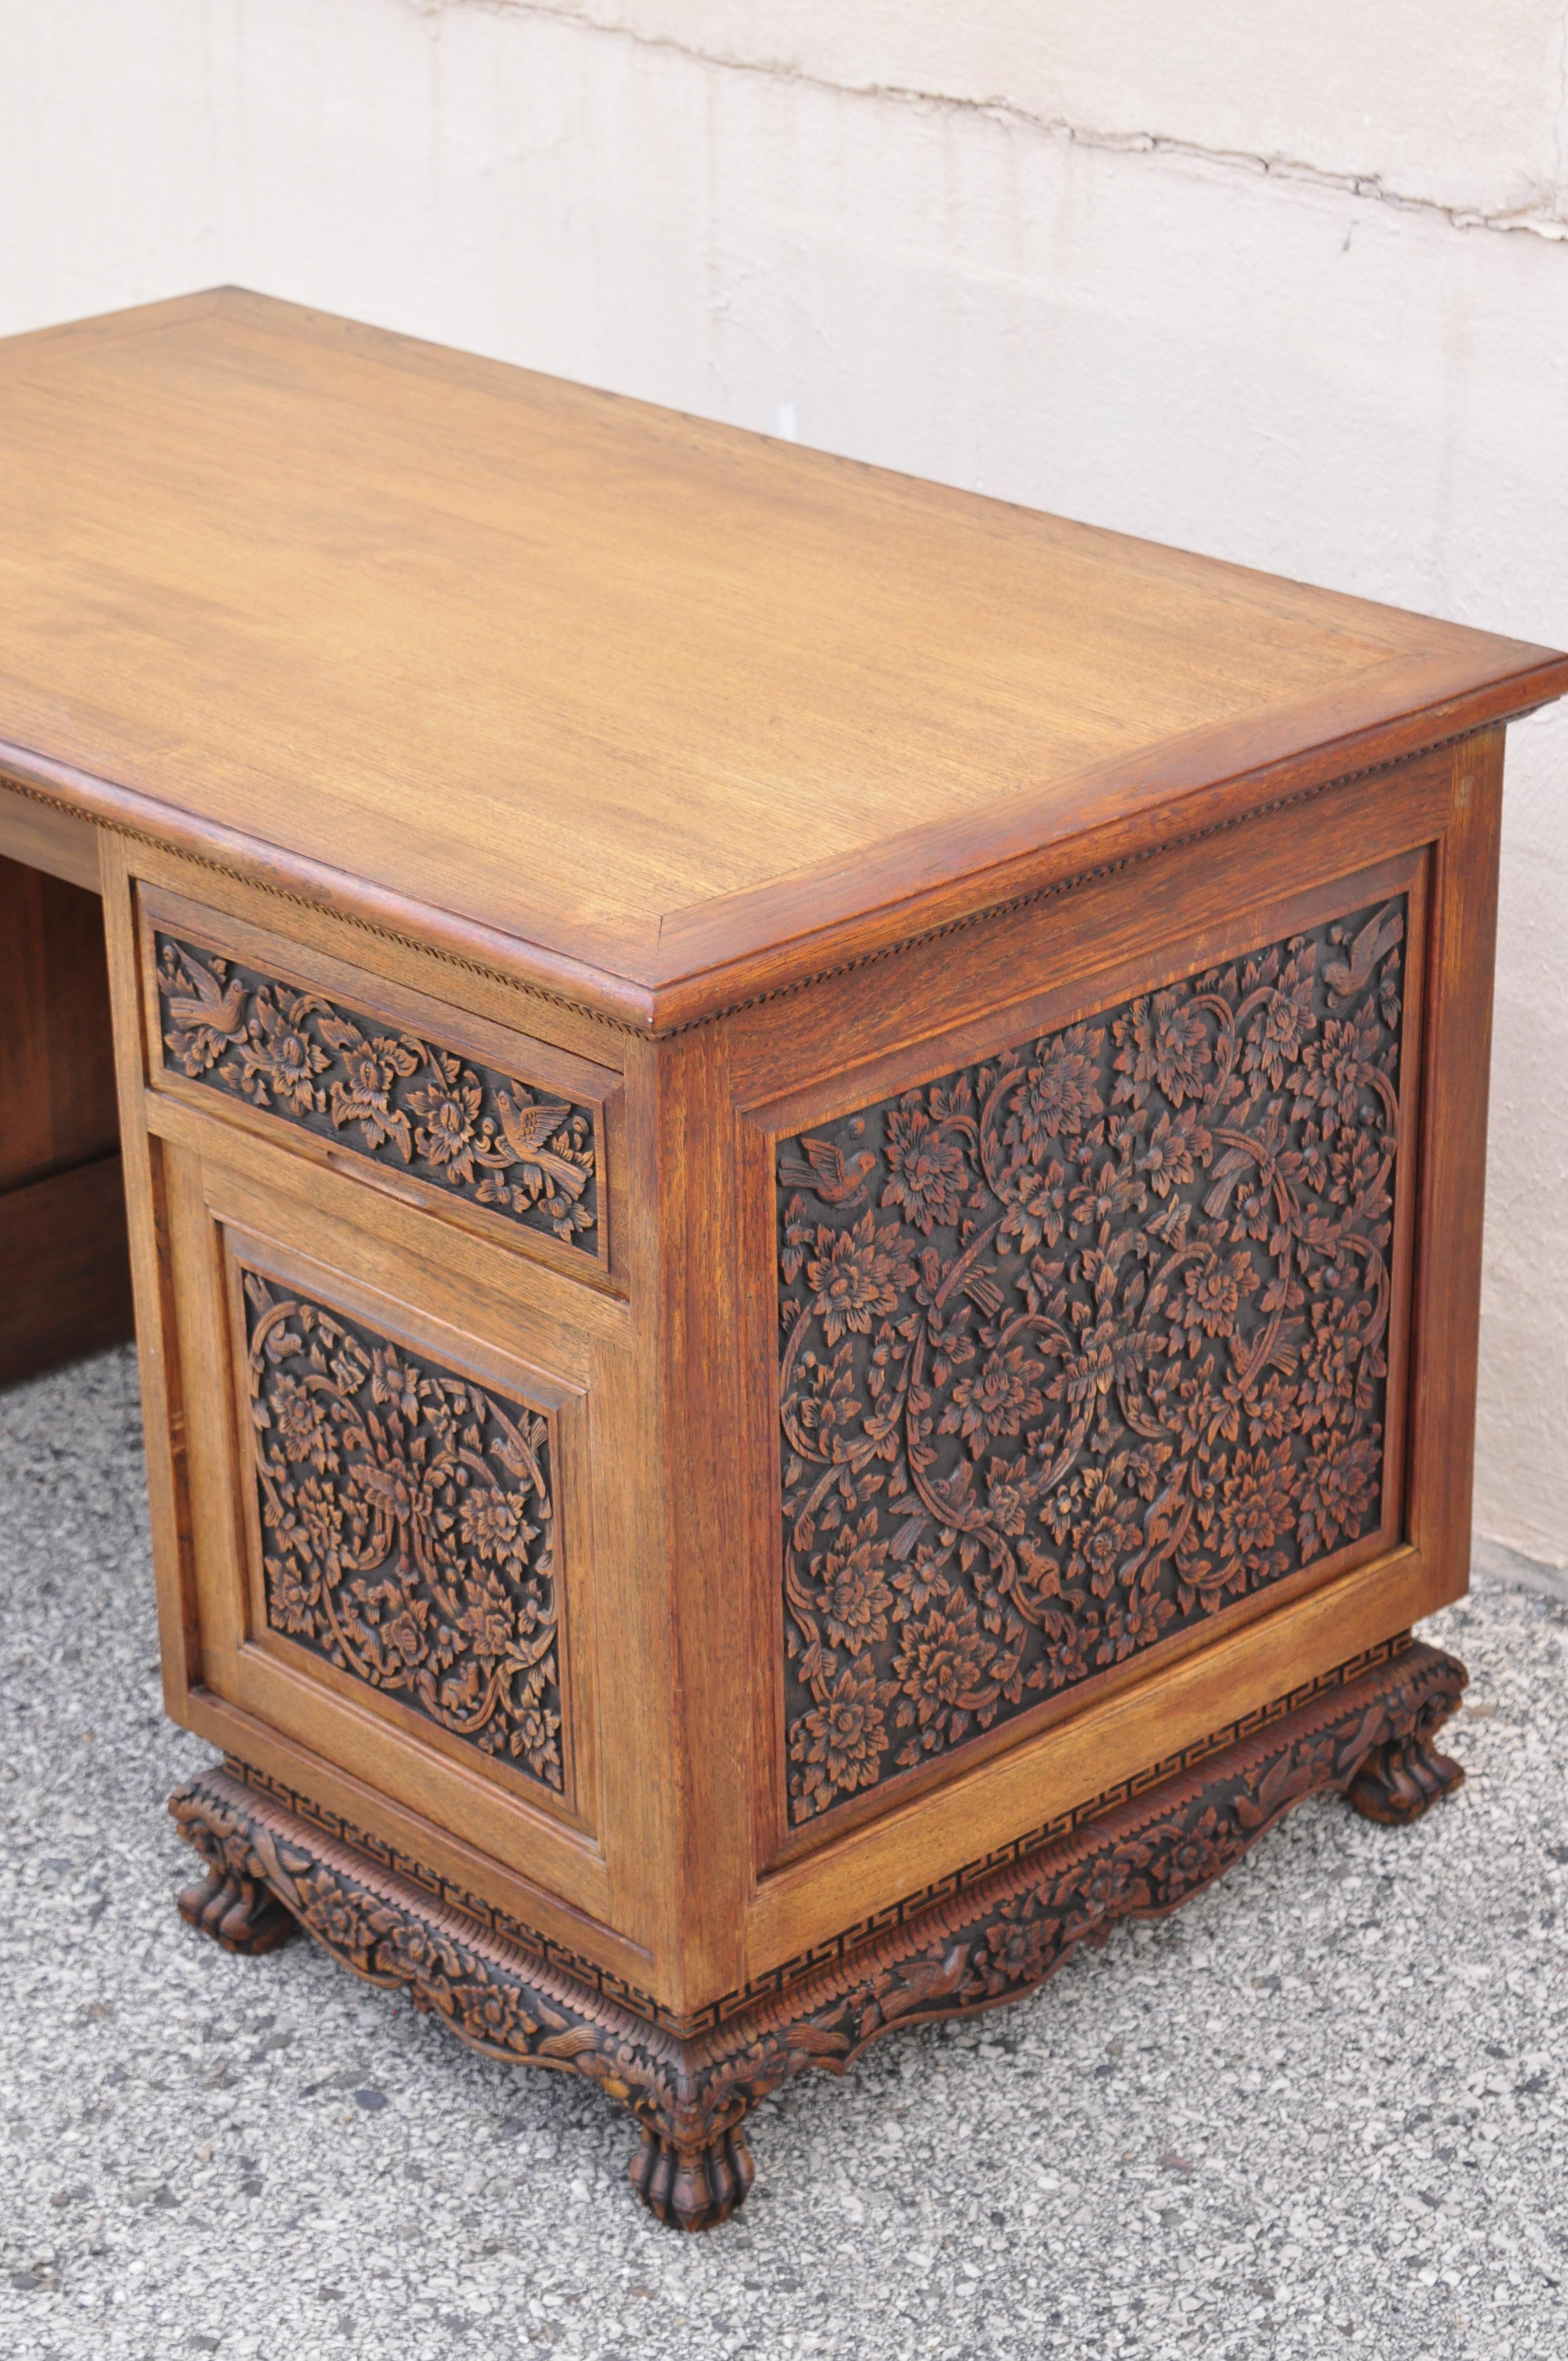 Vintage Chinese Carved Mahogany Pedestal Desk Flowers Birds and Leafy Scrolls For Sale 4